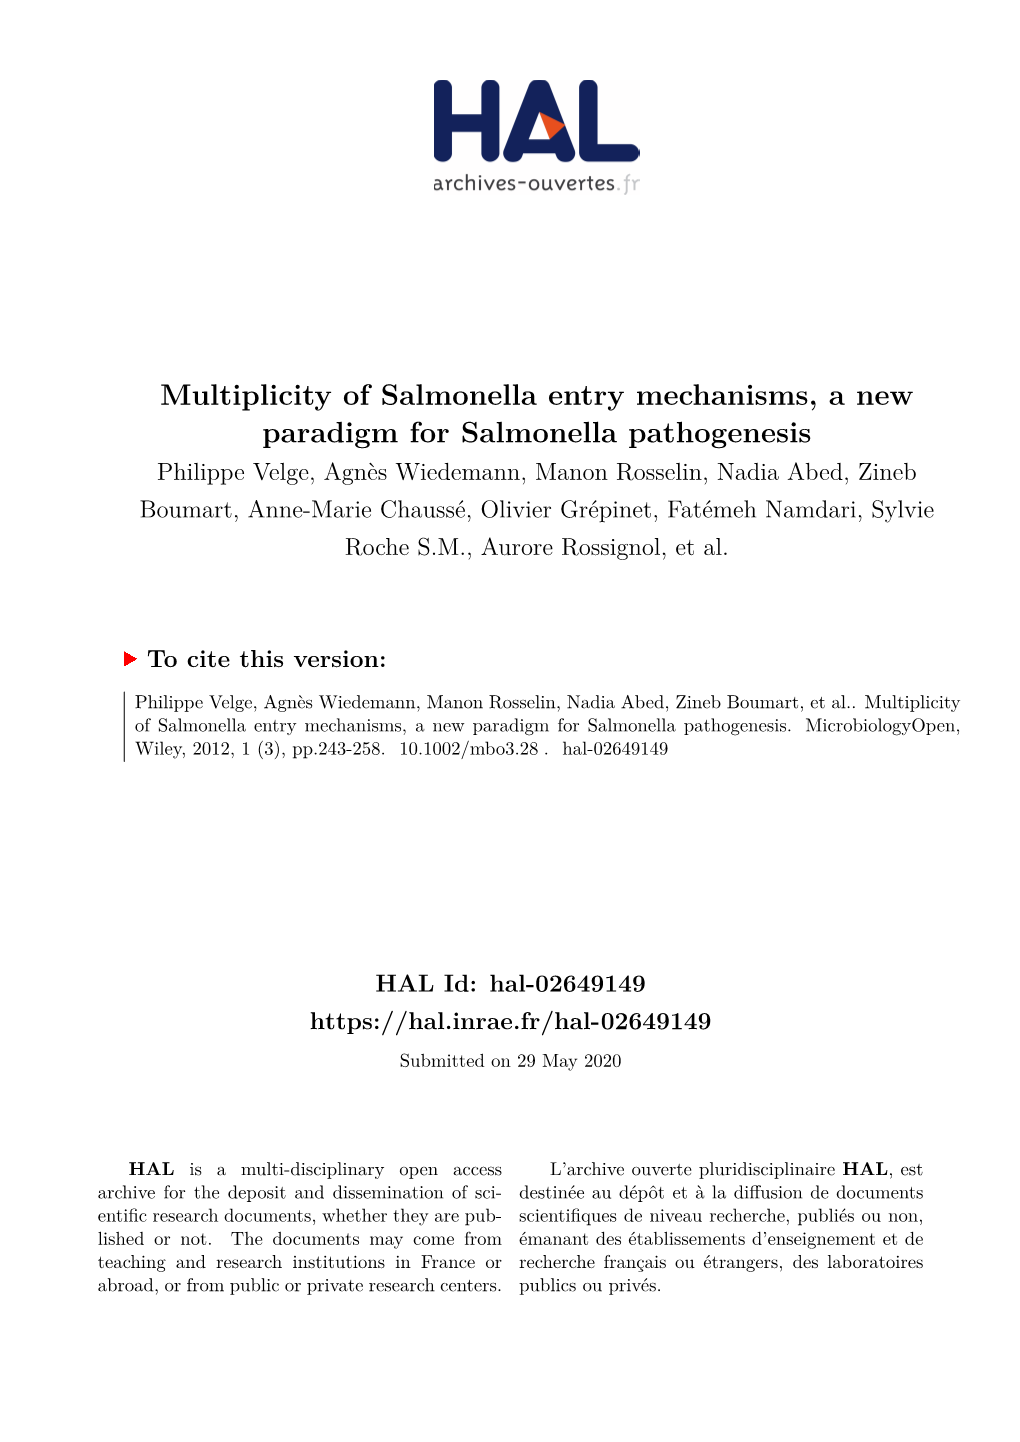 Multiplicity of Salmonella Entry Mechanisms, a New Paradigm For